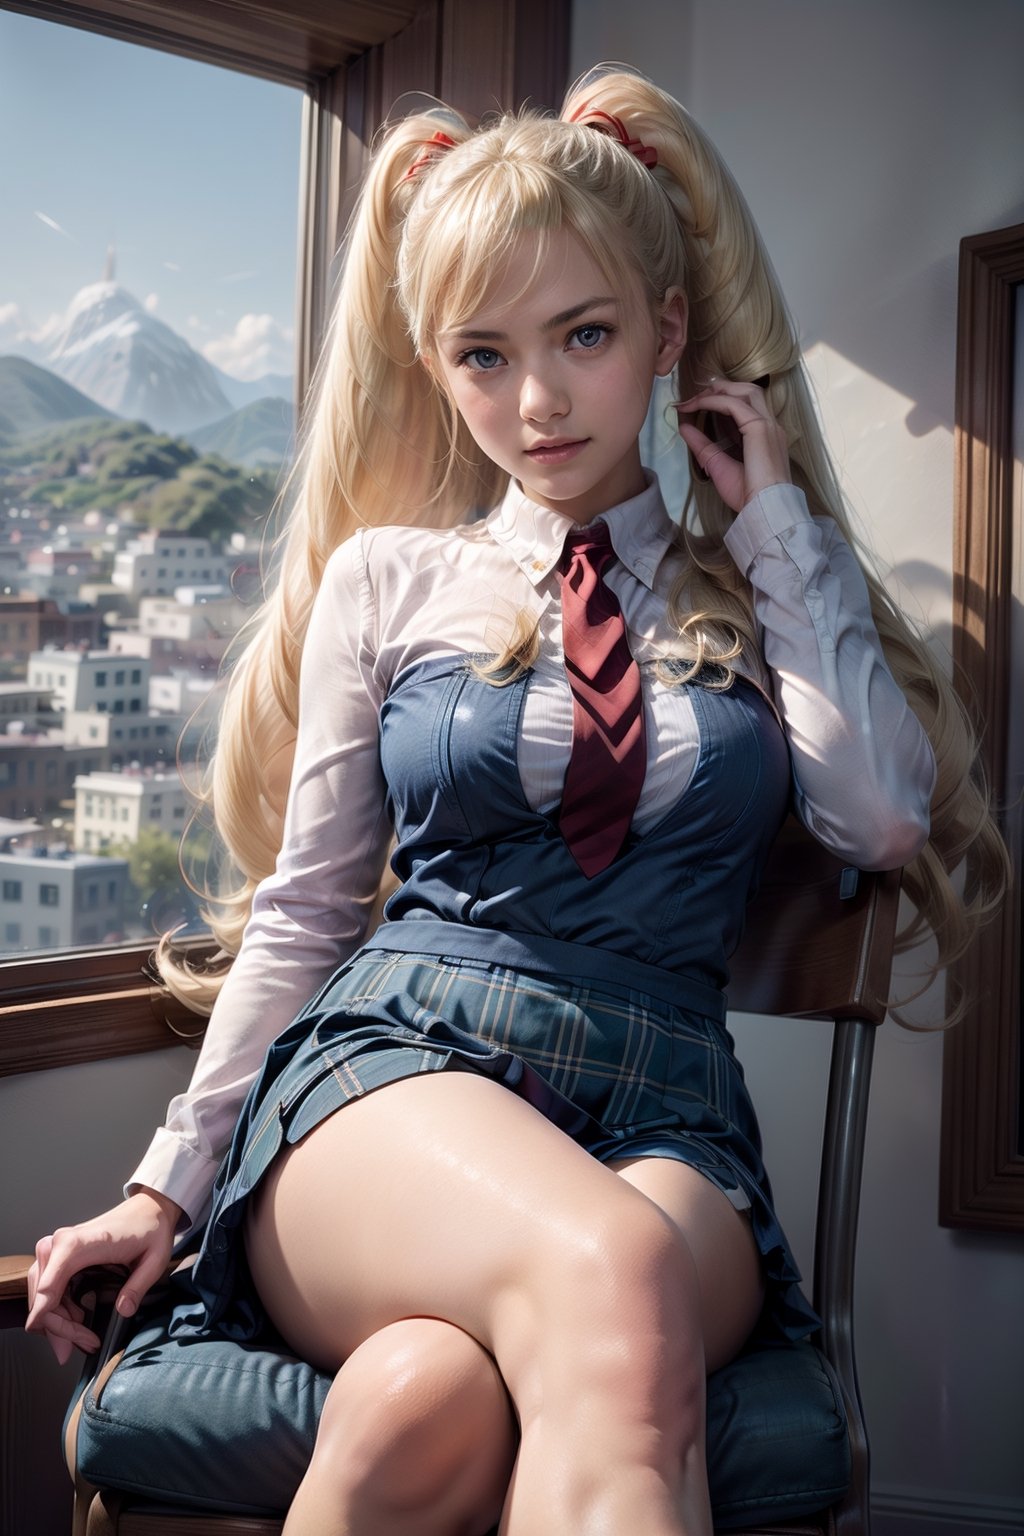   smile,   mature_woman, 27 years old, stern expression, frustrated, disappointed, flirty pose, sexy, looking at viewer, scenic view, Extremely Realistic, high resolution, masterpiece, 

TWINTAILS, TWIN DRILLS, Luna_MM, twin tails, drill hair, blonde, striped tights,blue dress, school uniform, skirt, blond_hair, big hair, big red ribbon in hair,

   scenic view, smile,  parted lips ,

 crossed legs, sitting in a chair, elbows on chair,